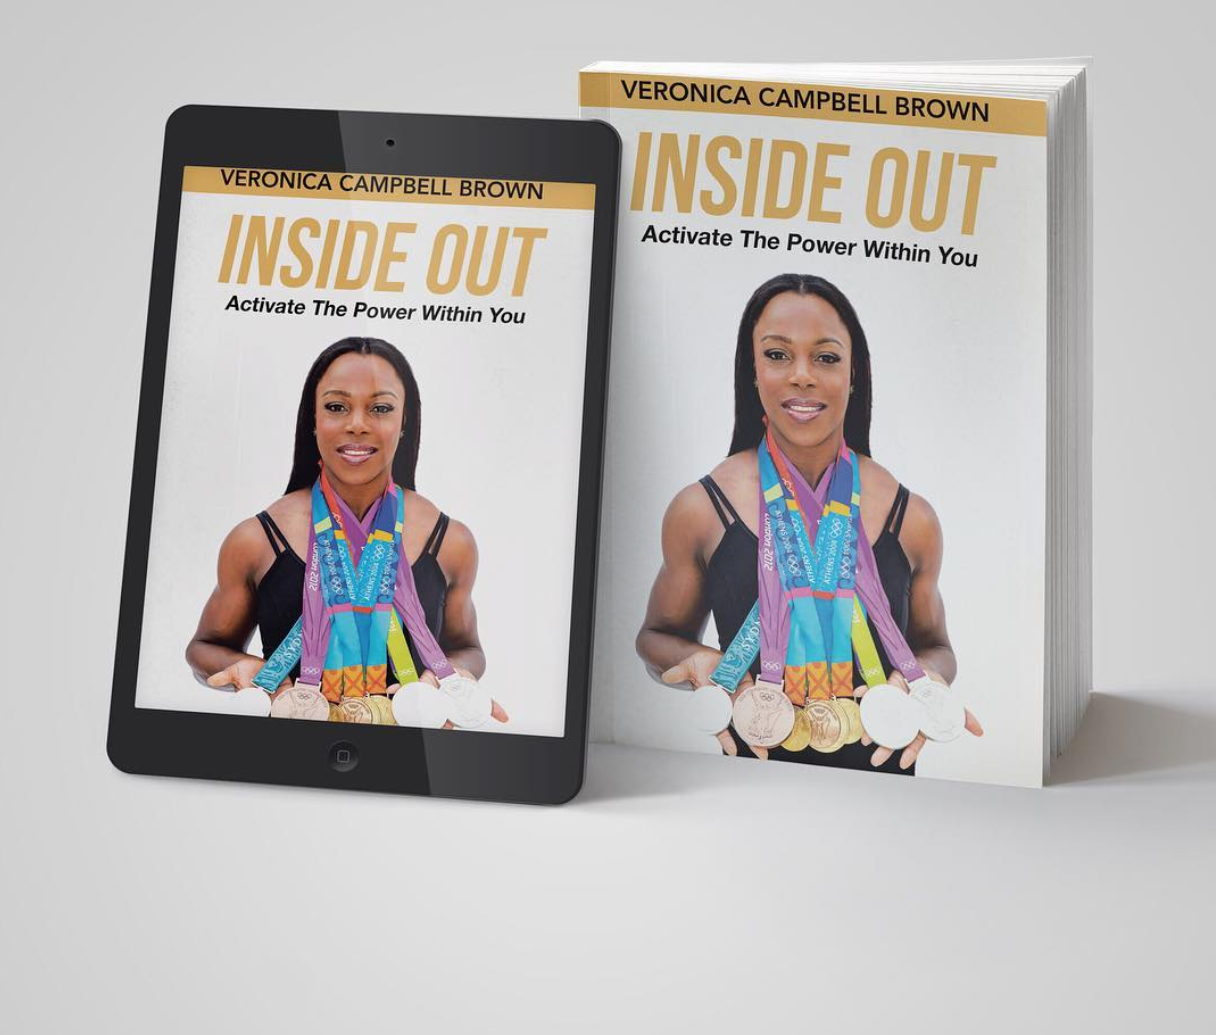 VCB’s ‘INSIDE OUT’ book to release soon